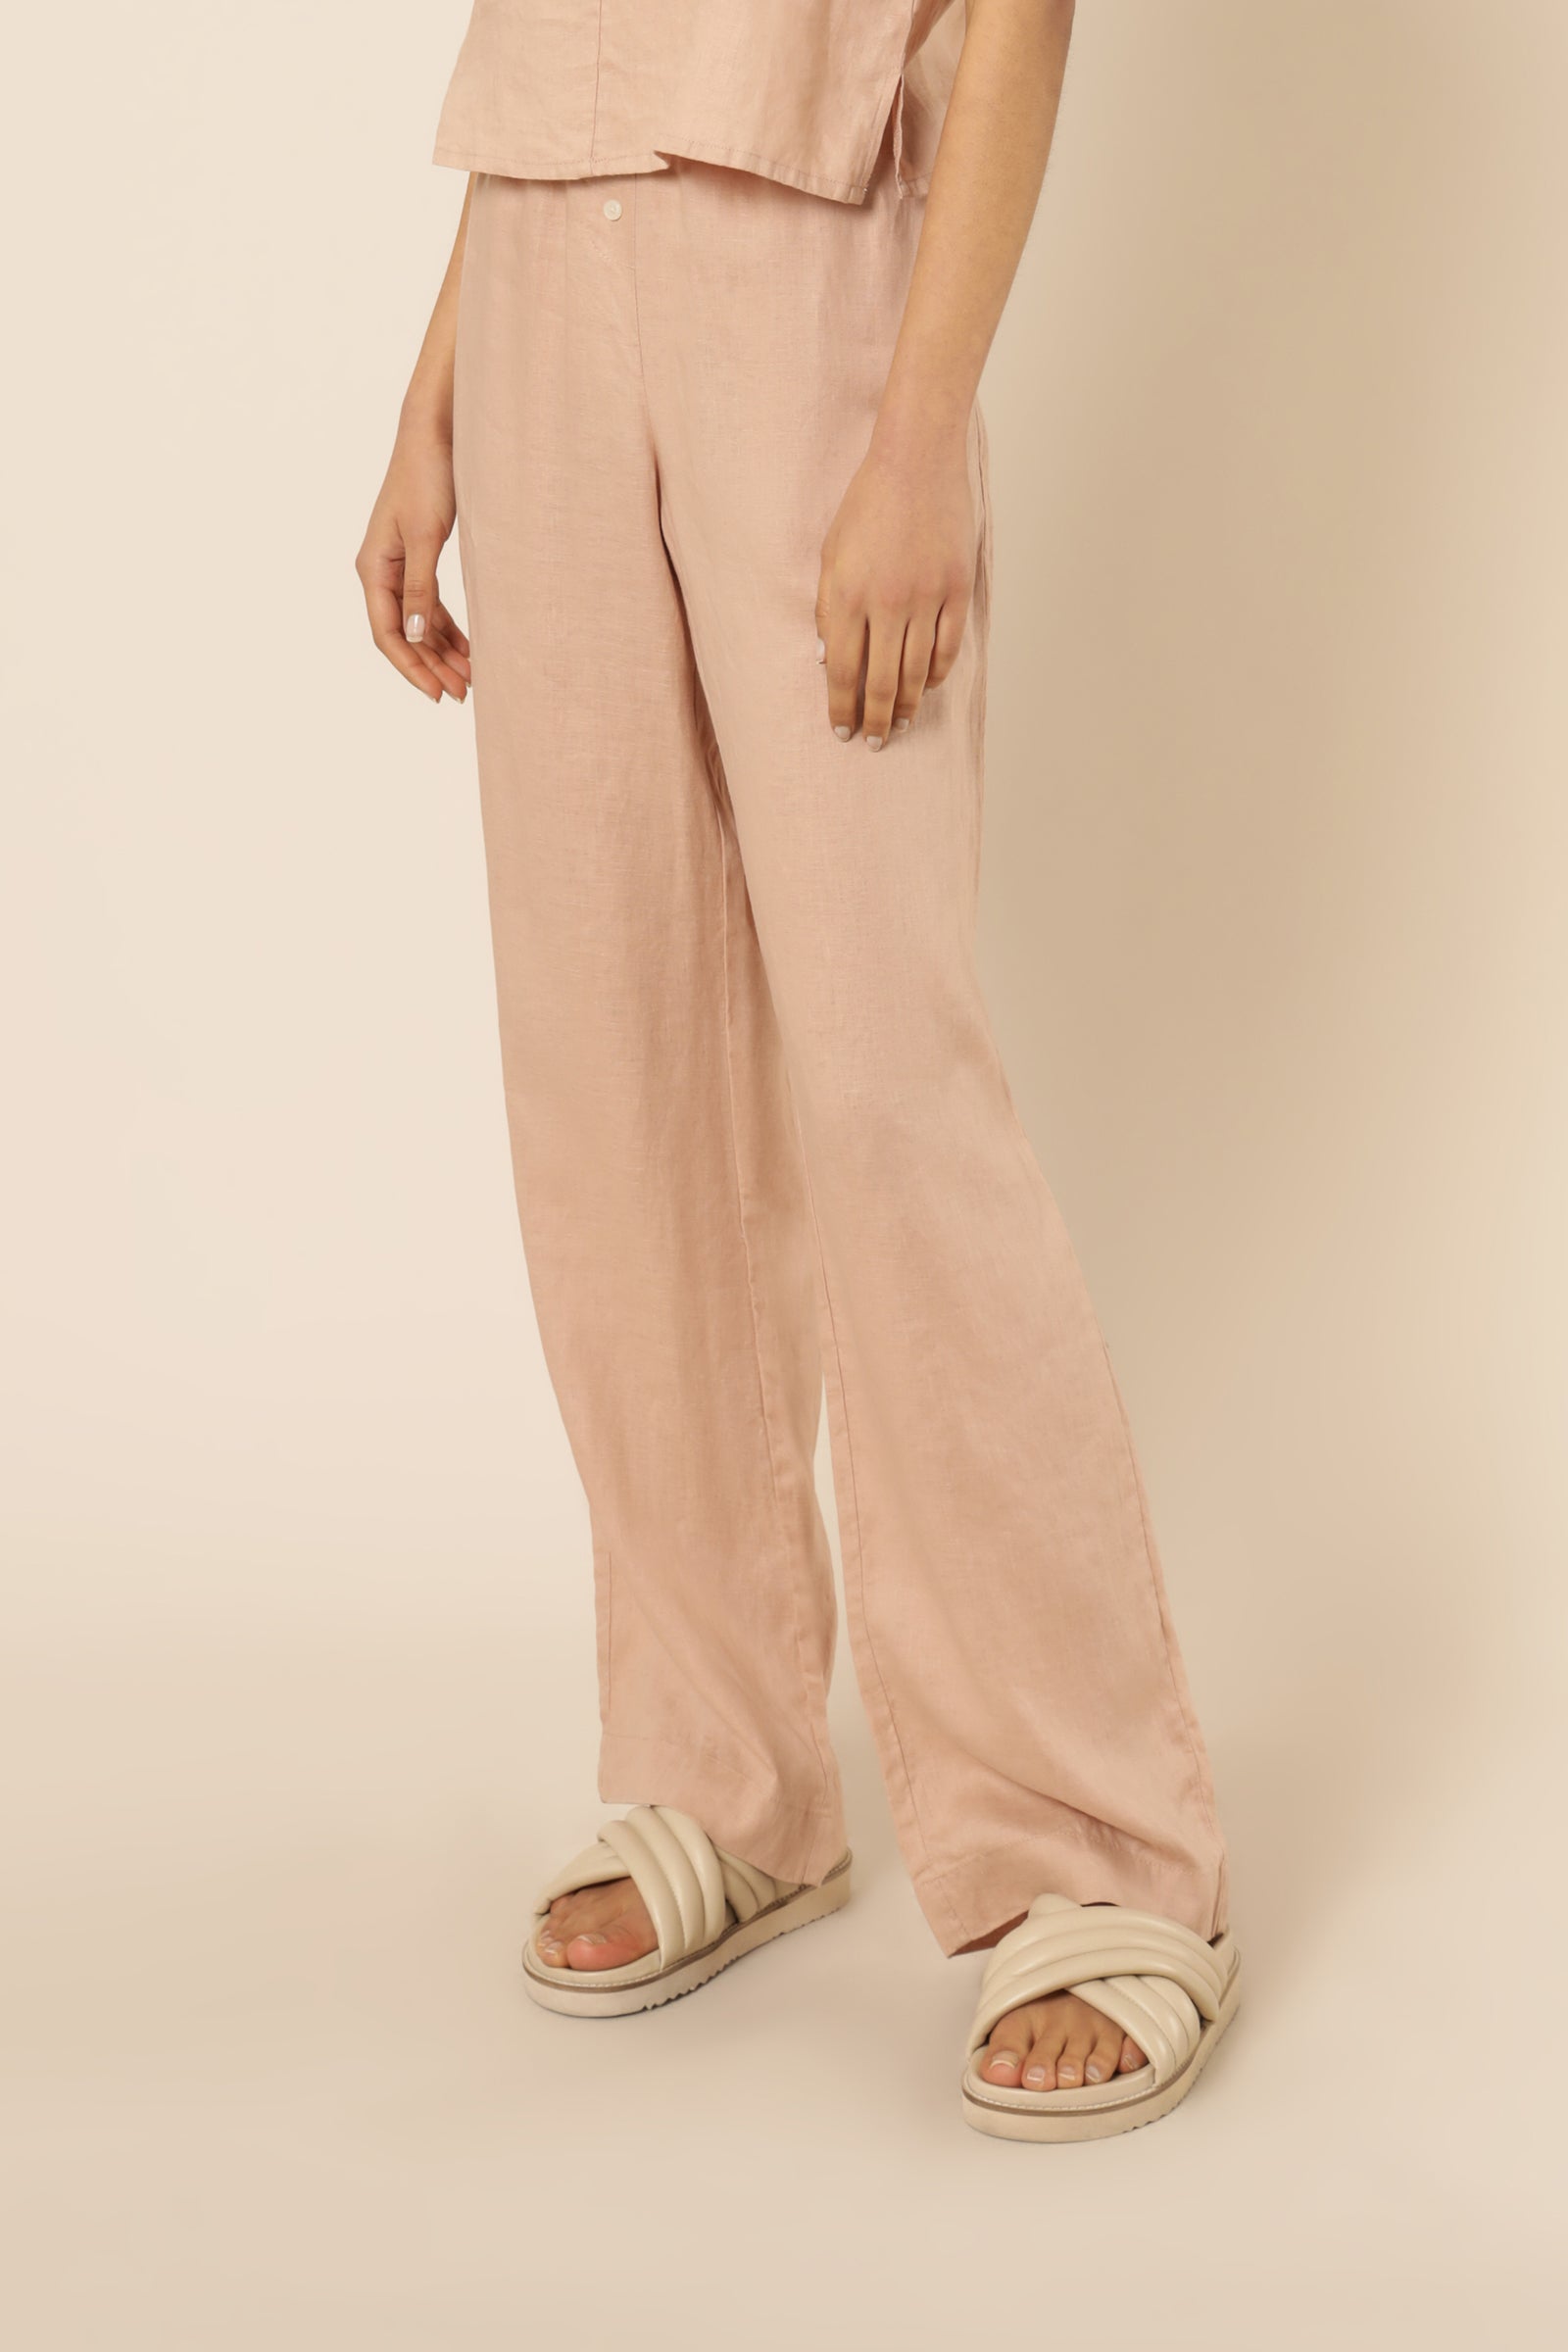 Nude Lucy Nude Linen Lounge Pant Clay Pants 